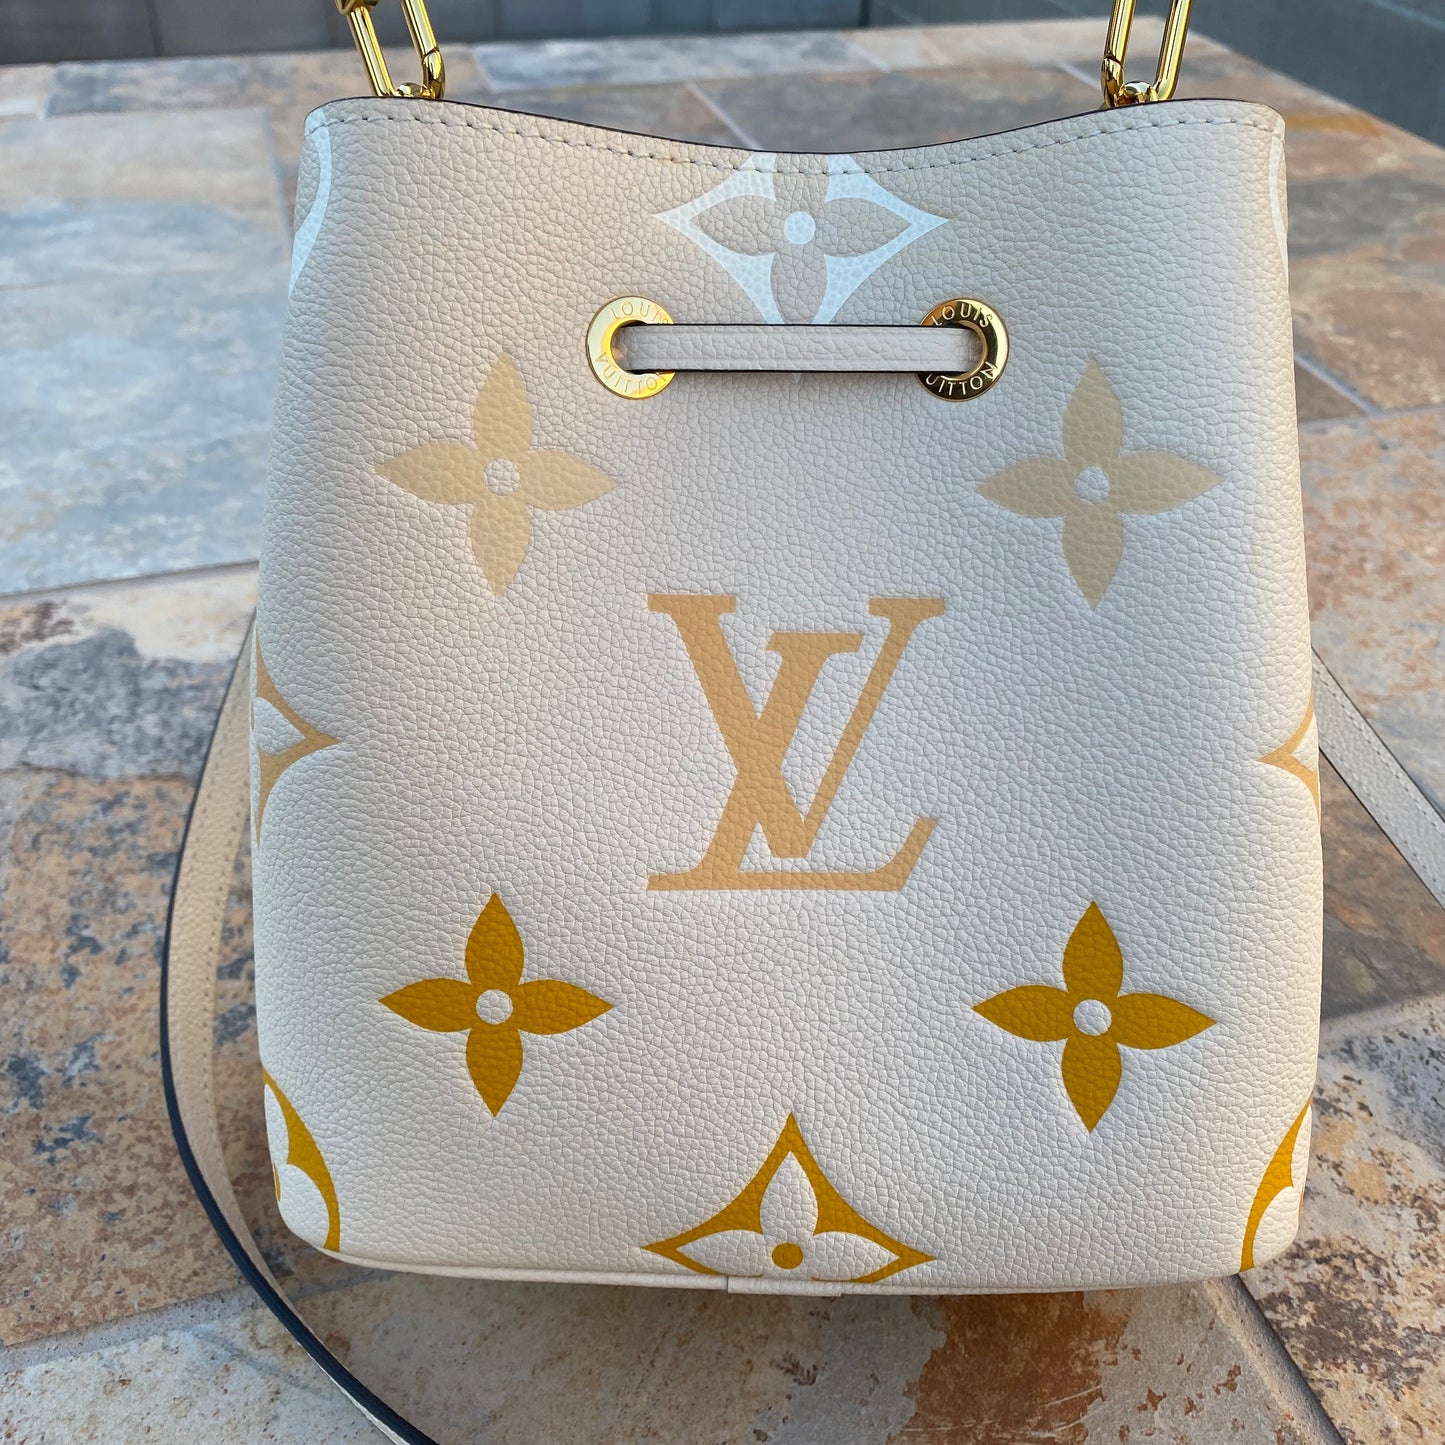 LOUIS VUITTON Empreinte Monogram Giant By The Pool Neonoe BB in Cream and  Saffron. This classic bucket-style shoulder bag features…